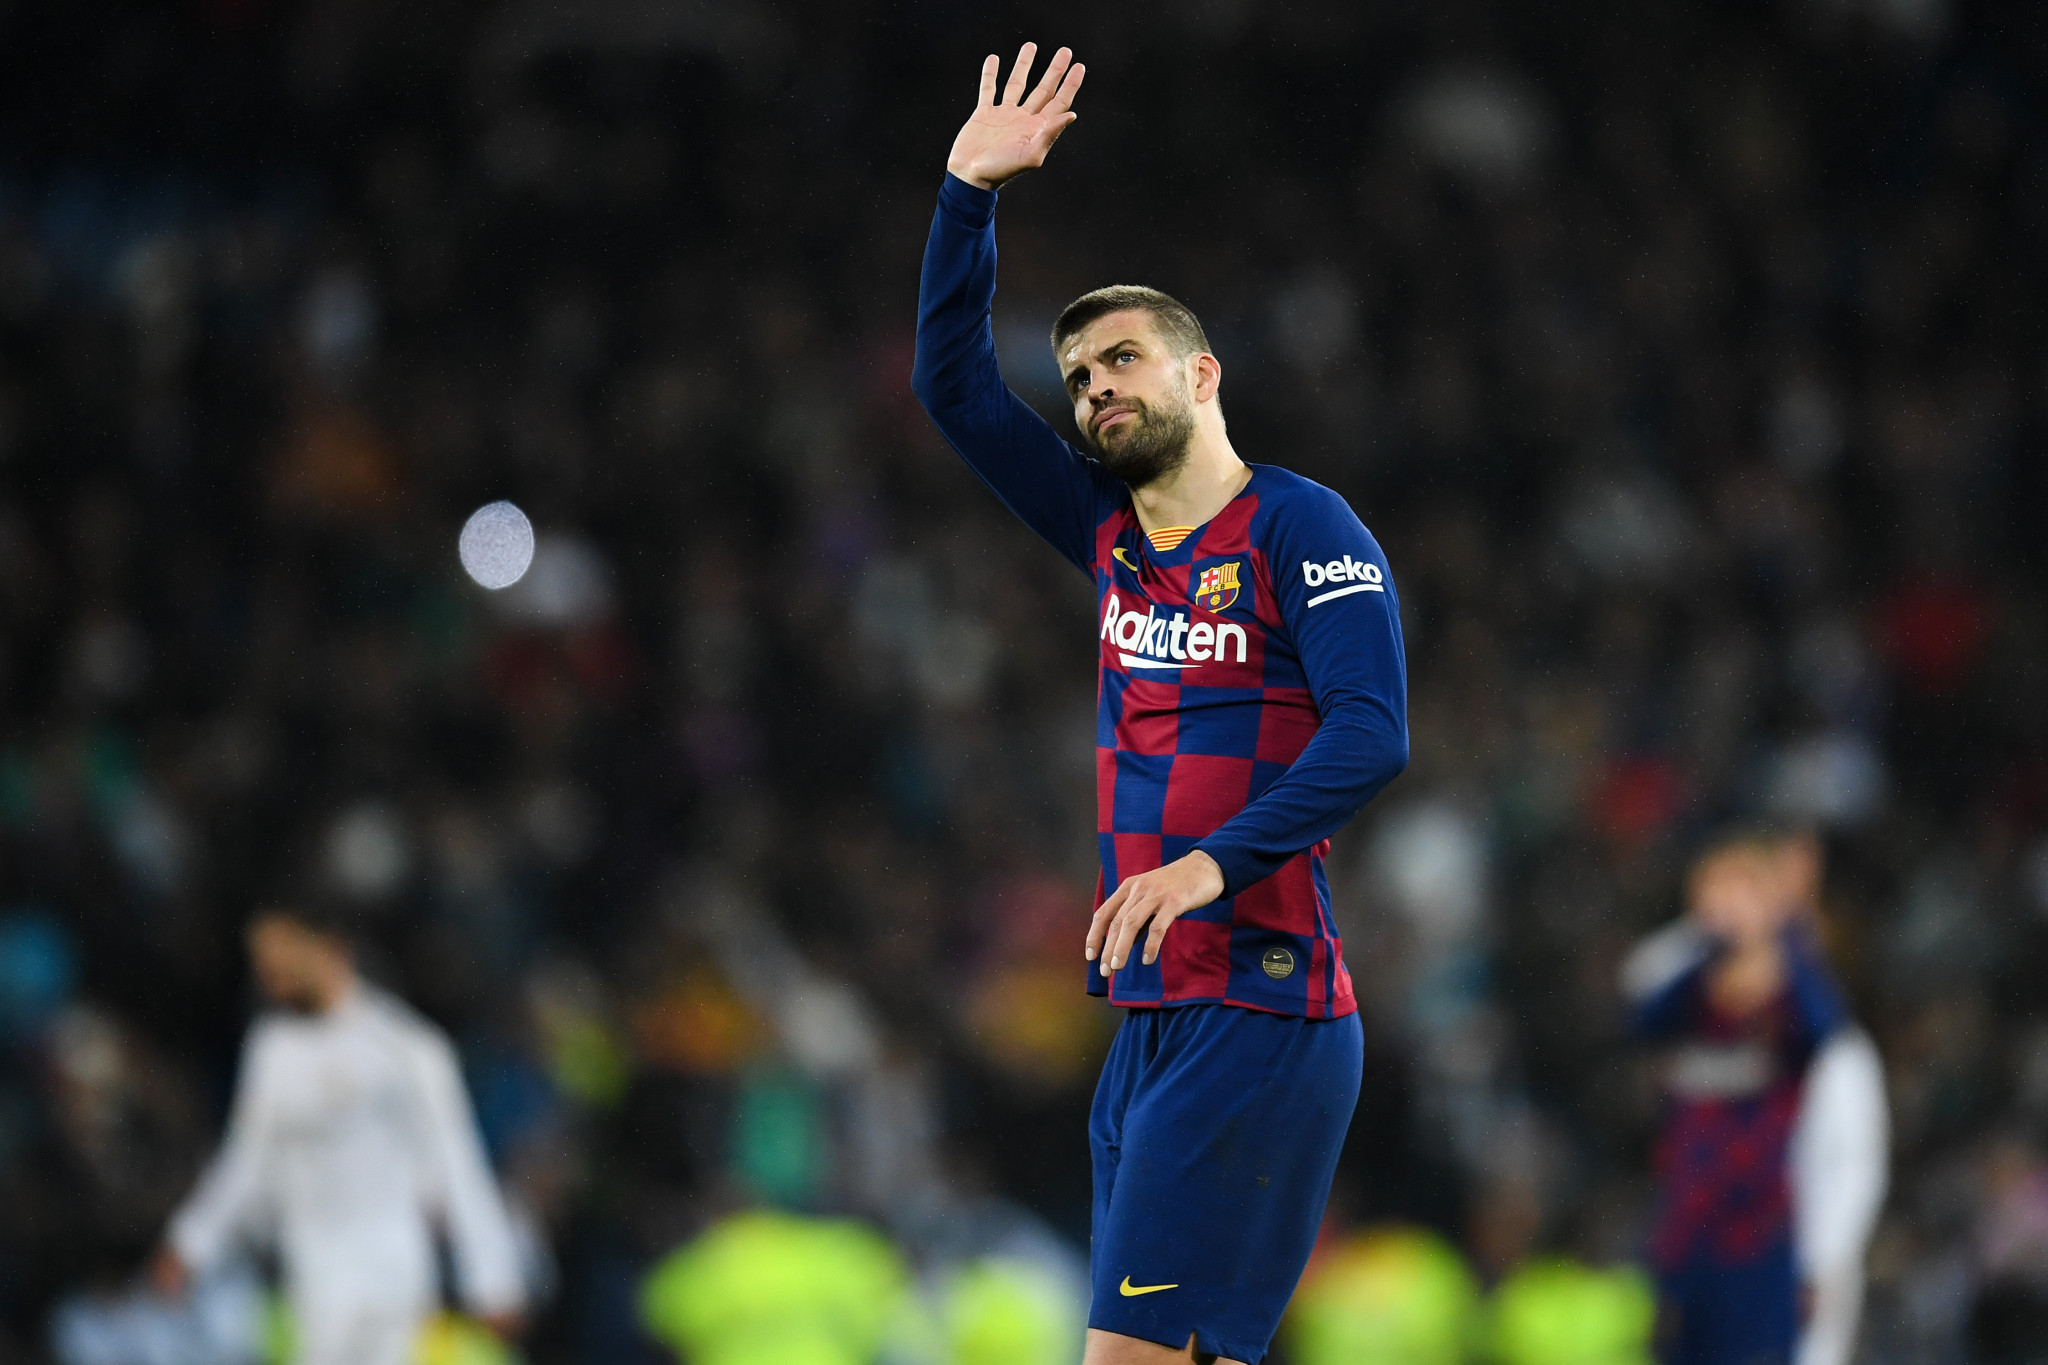 Gerard Piqué has expressed doubts over whether the event will take place should fans not be present ©Getty Images